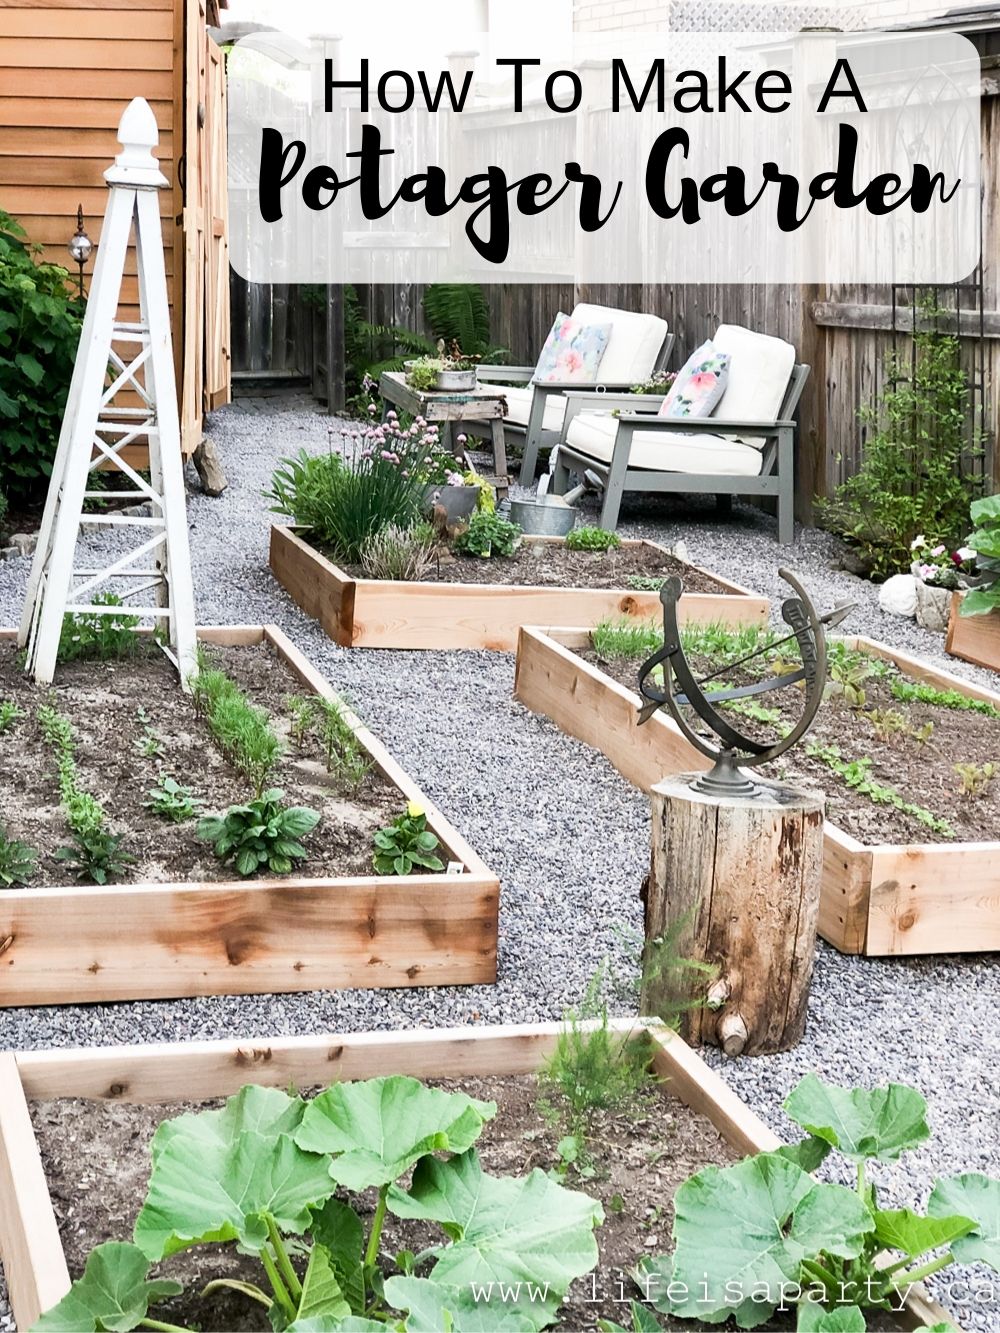 How To Make A Potager Garden: create a beautiful French kitchen garden with flowers, herbs, and vegetables in raised beds, and garden she shed.